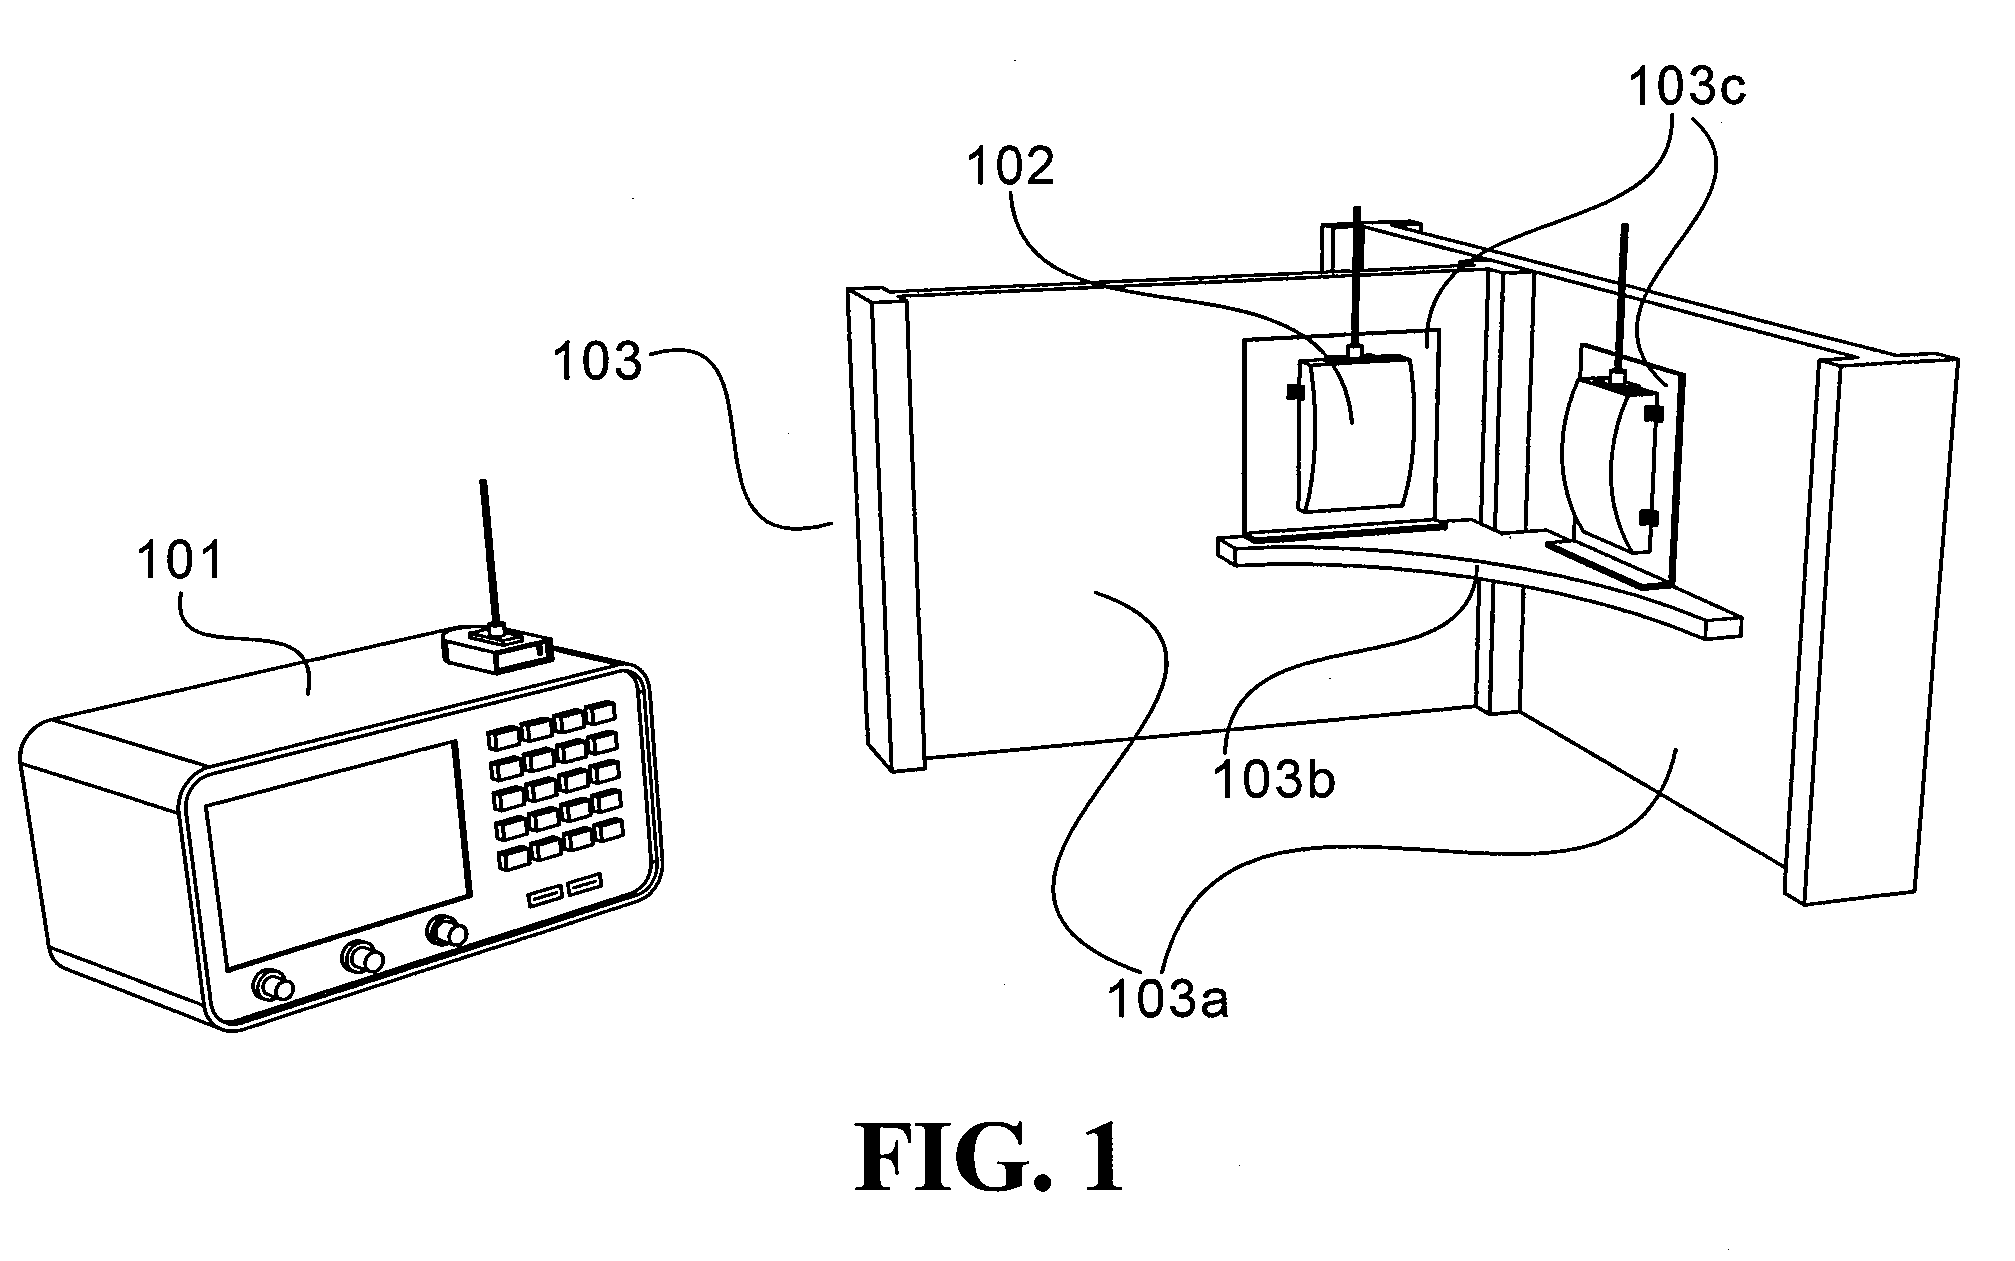 Enhanced wireless eddy current probe for a non-destructive inspection system